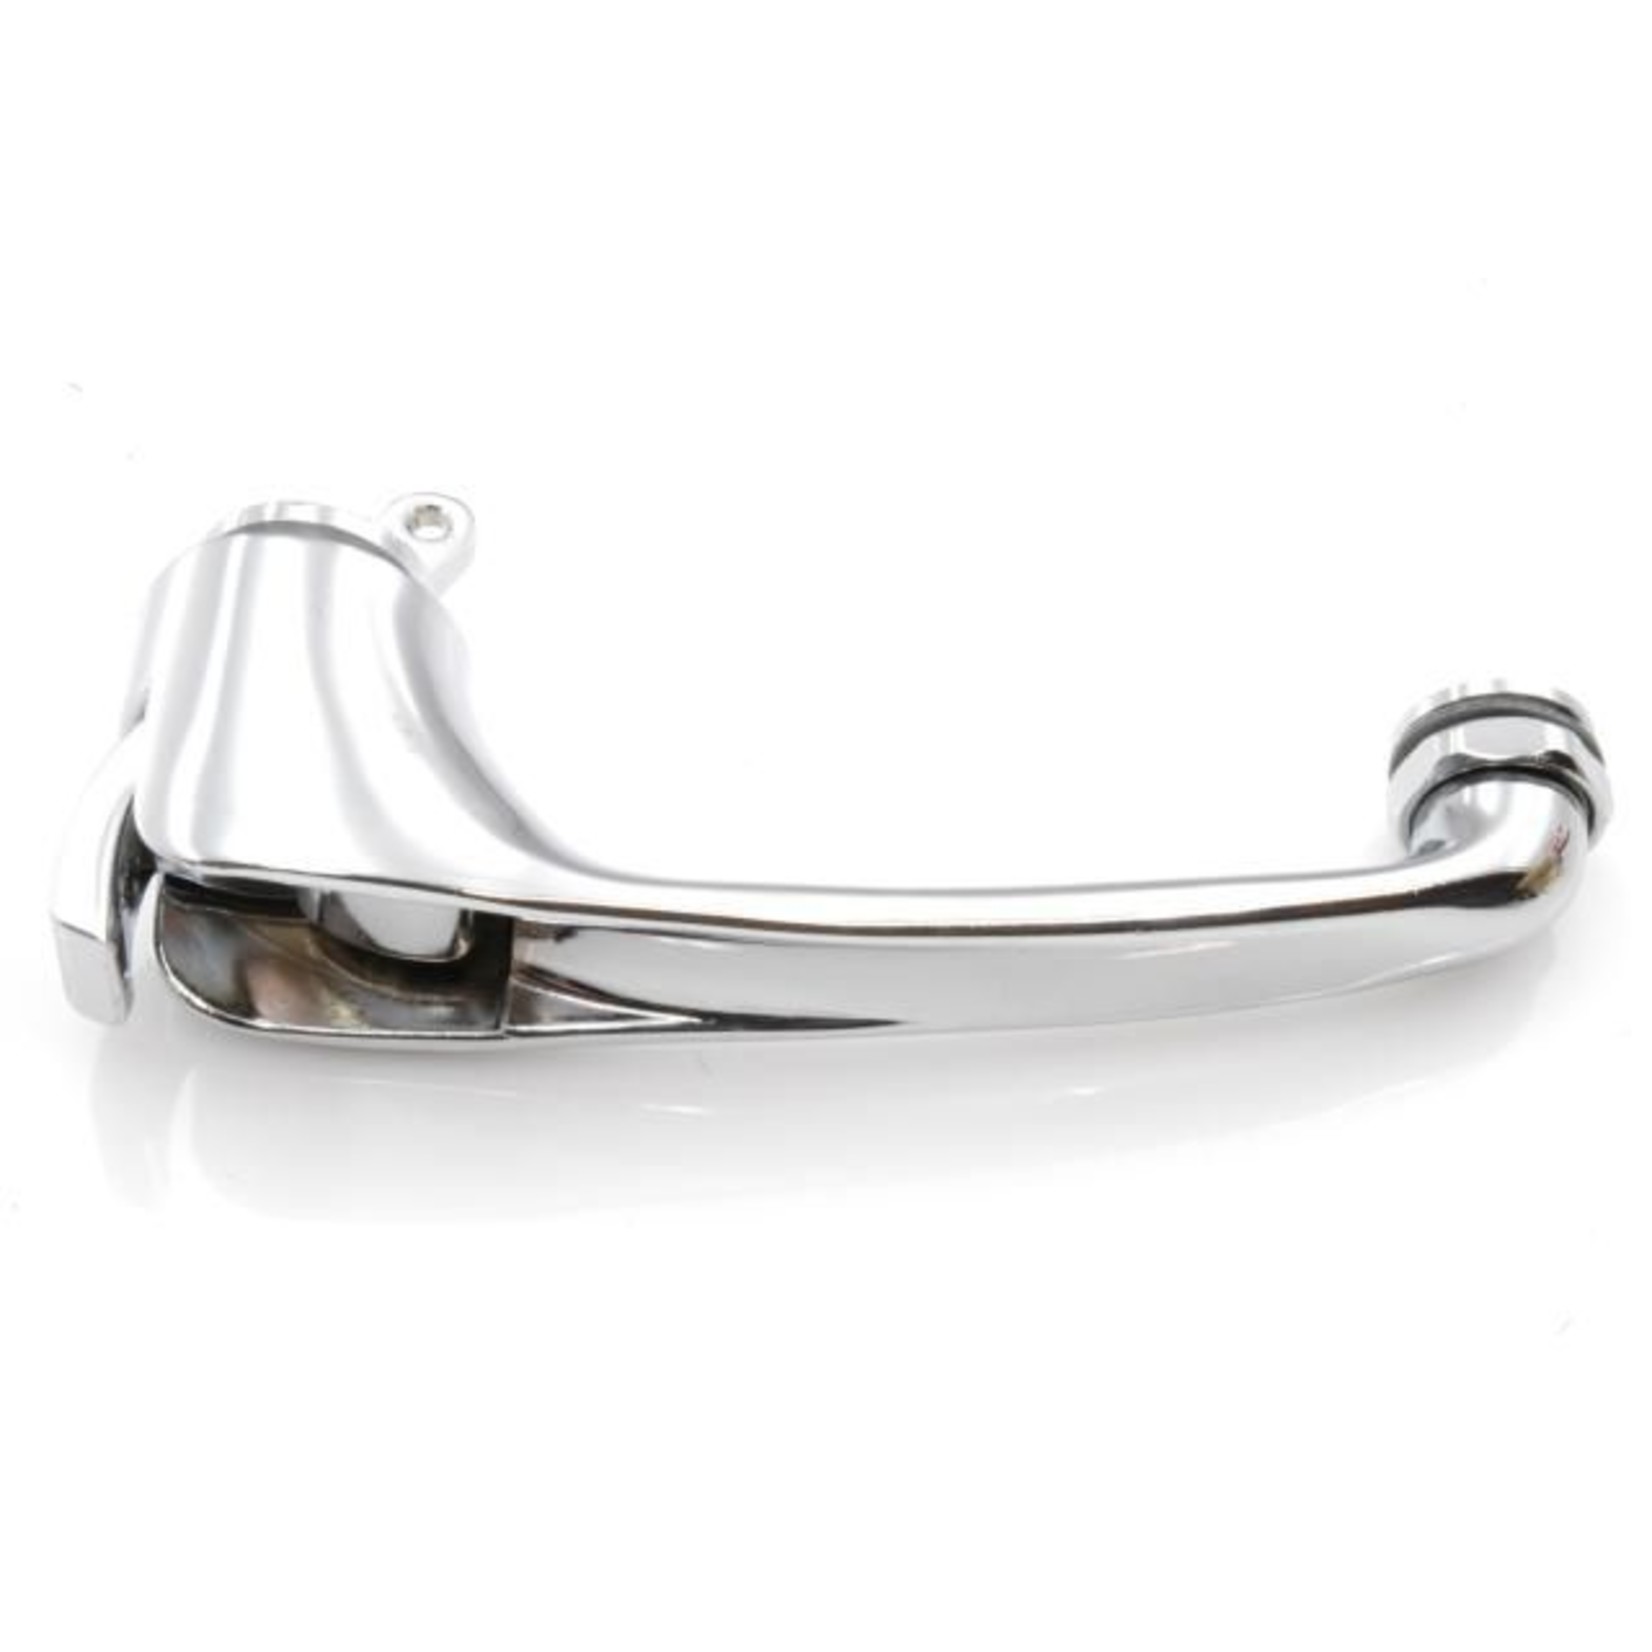 Int handle chrome right tong 79mm Nr Org: 5426404